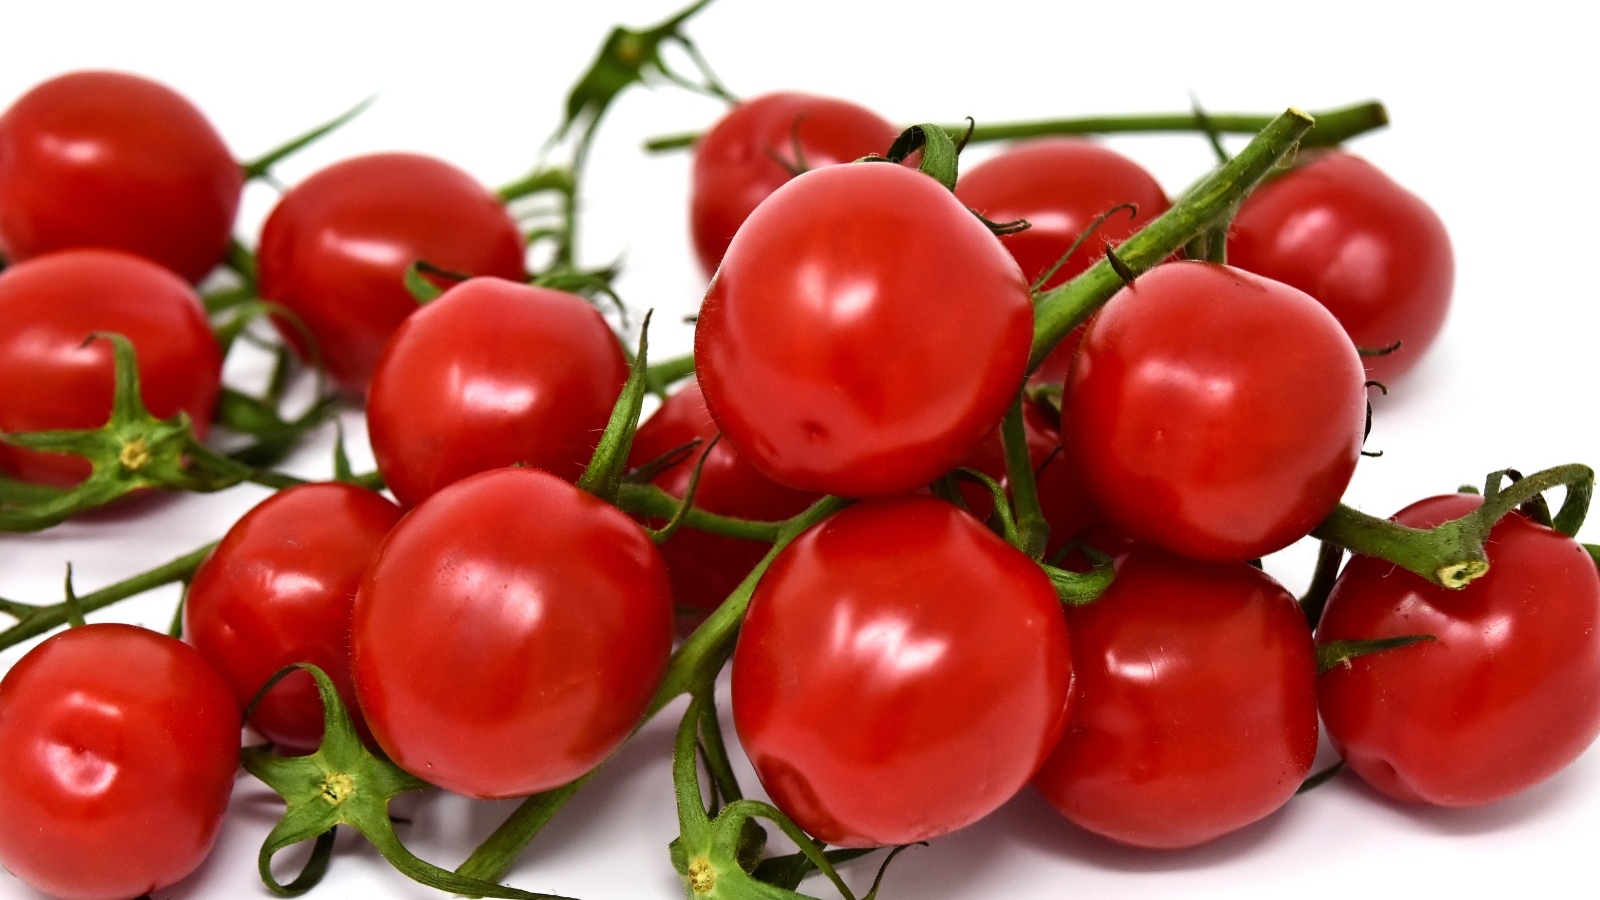 Small red cherry tomatoes